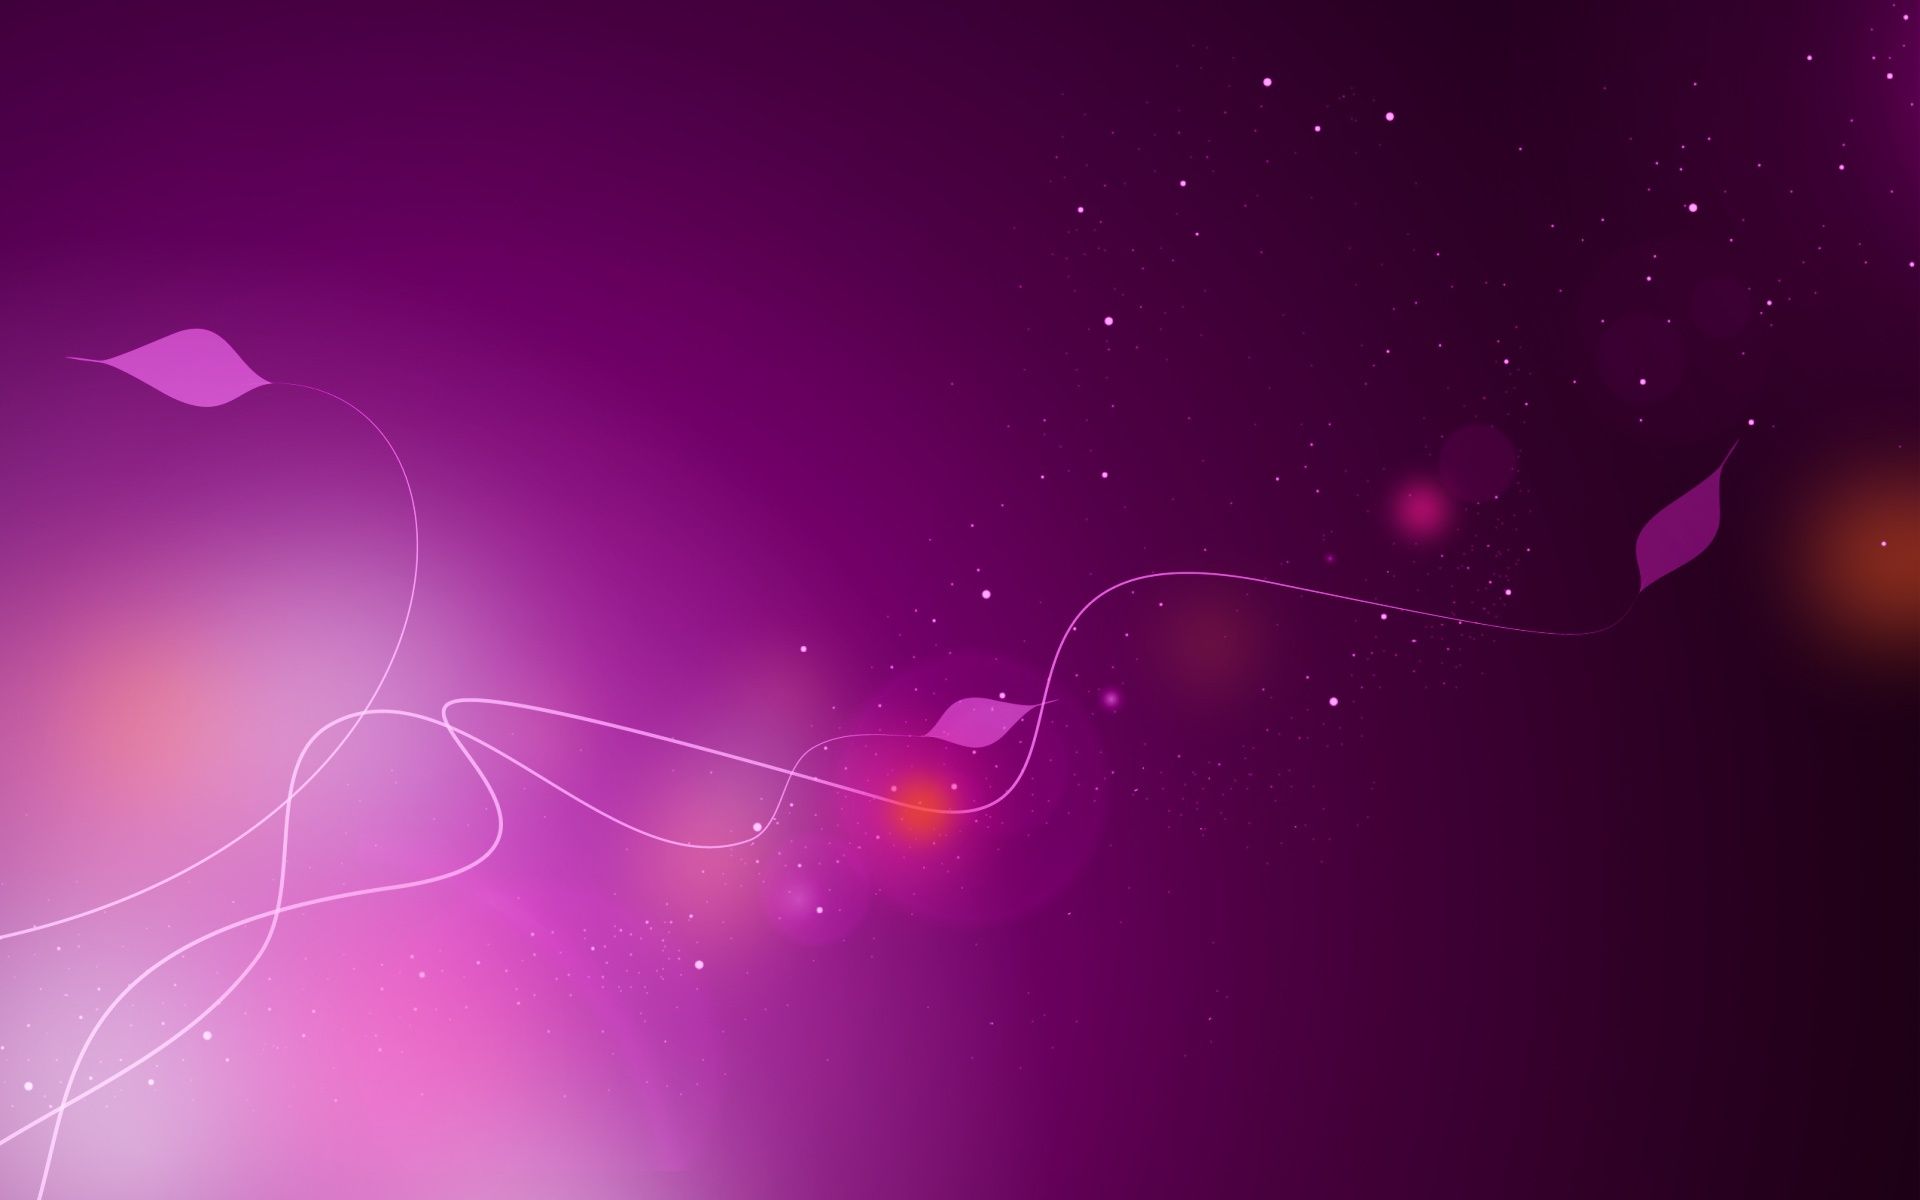 3D Wallpapers | Abstract Desktop Backgrounds | HD Wallpapers - Page 2